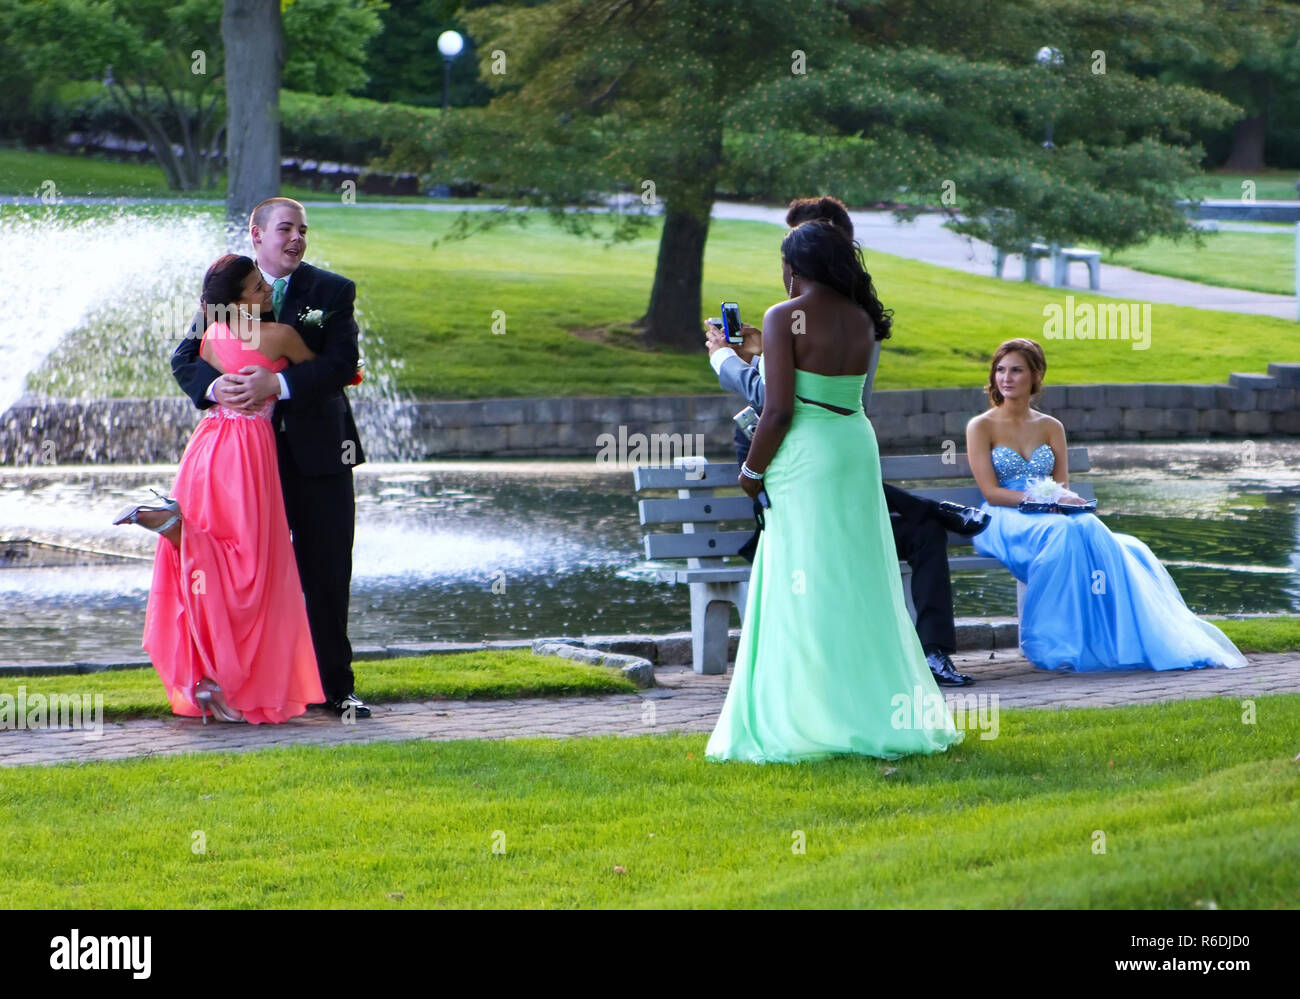 Plainville, CT USA. June 2013. Seniors having fun taking pictures, laughing, and some just anxiously waiting for the big night of the prom. Stock Photo